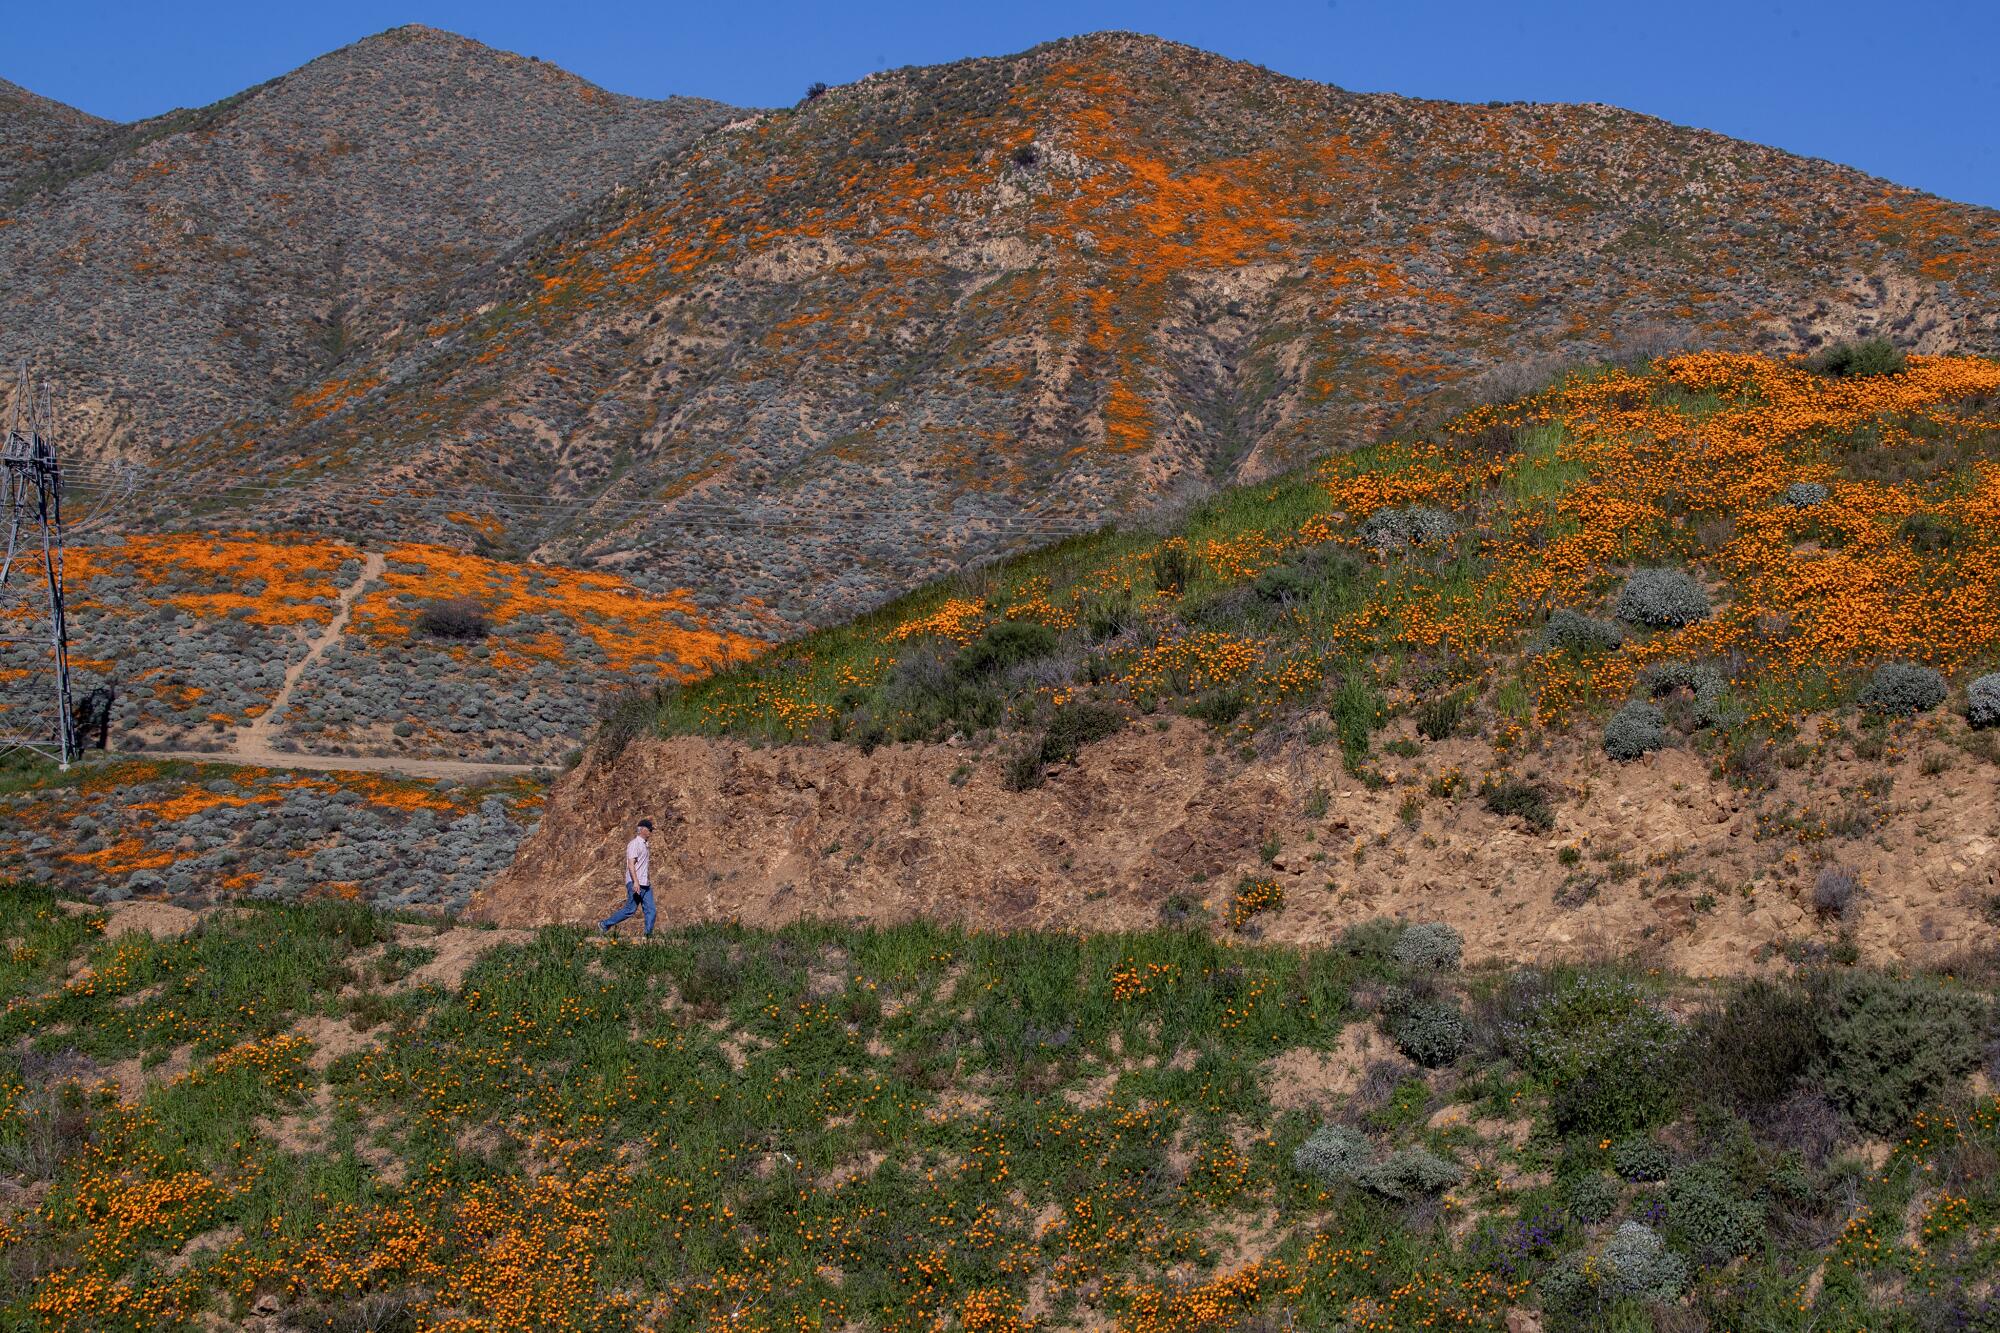 Jeff Foster was able to take in a takes a scenic hike to view of the spring California Poppies